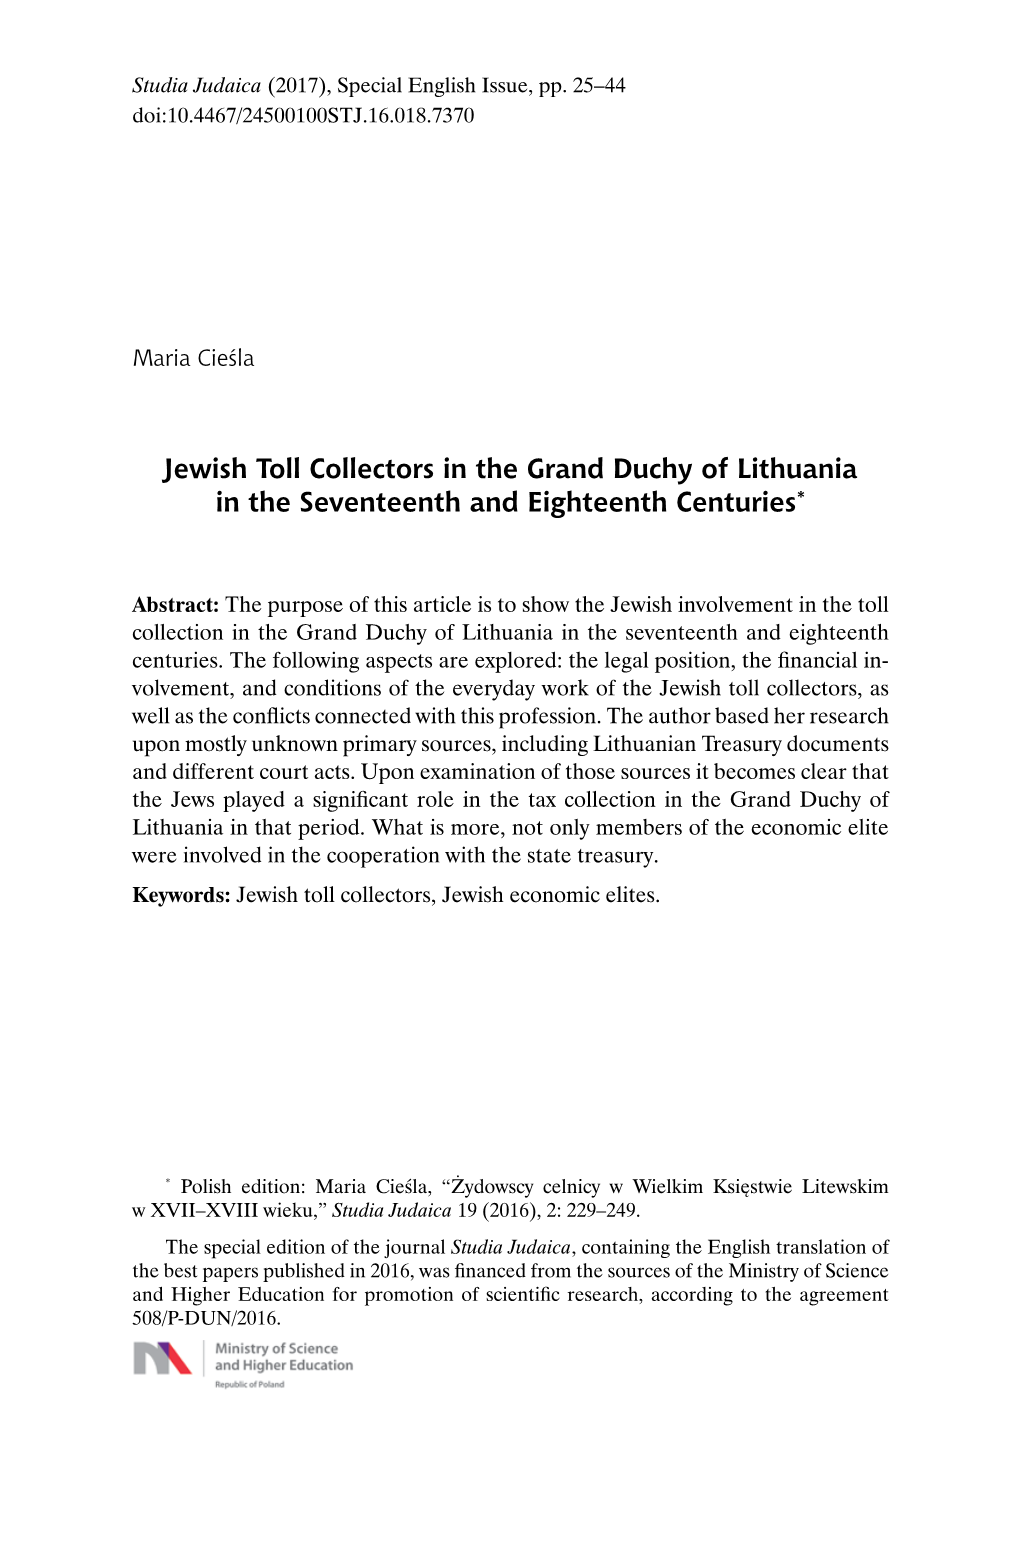 Jewish Toll Collectors in the Grand Duchy of Lithuania in the Seventeenth and Eighteenth Centuries*